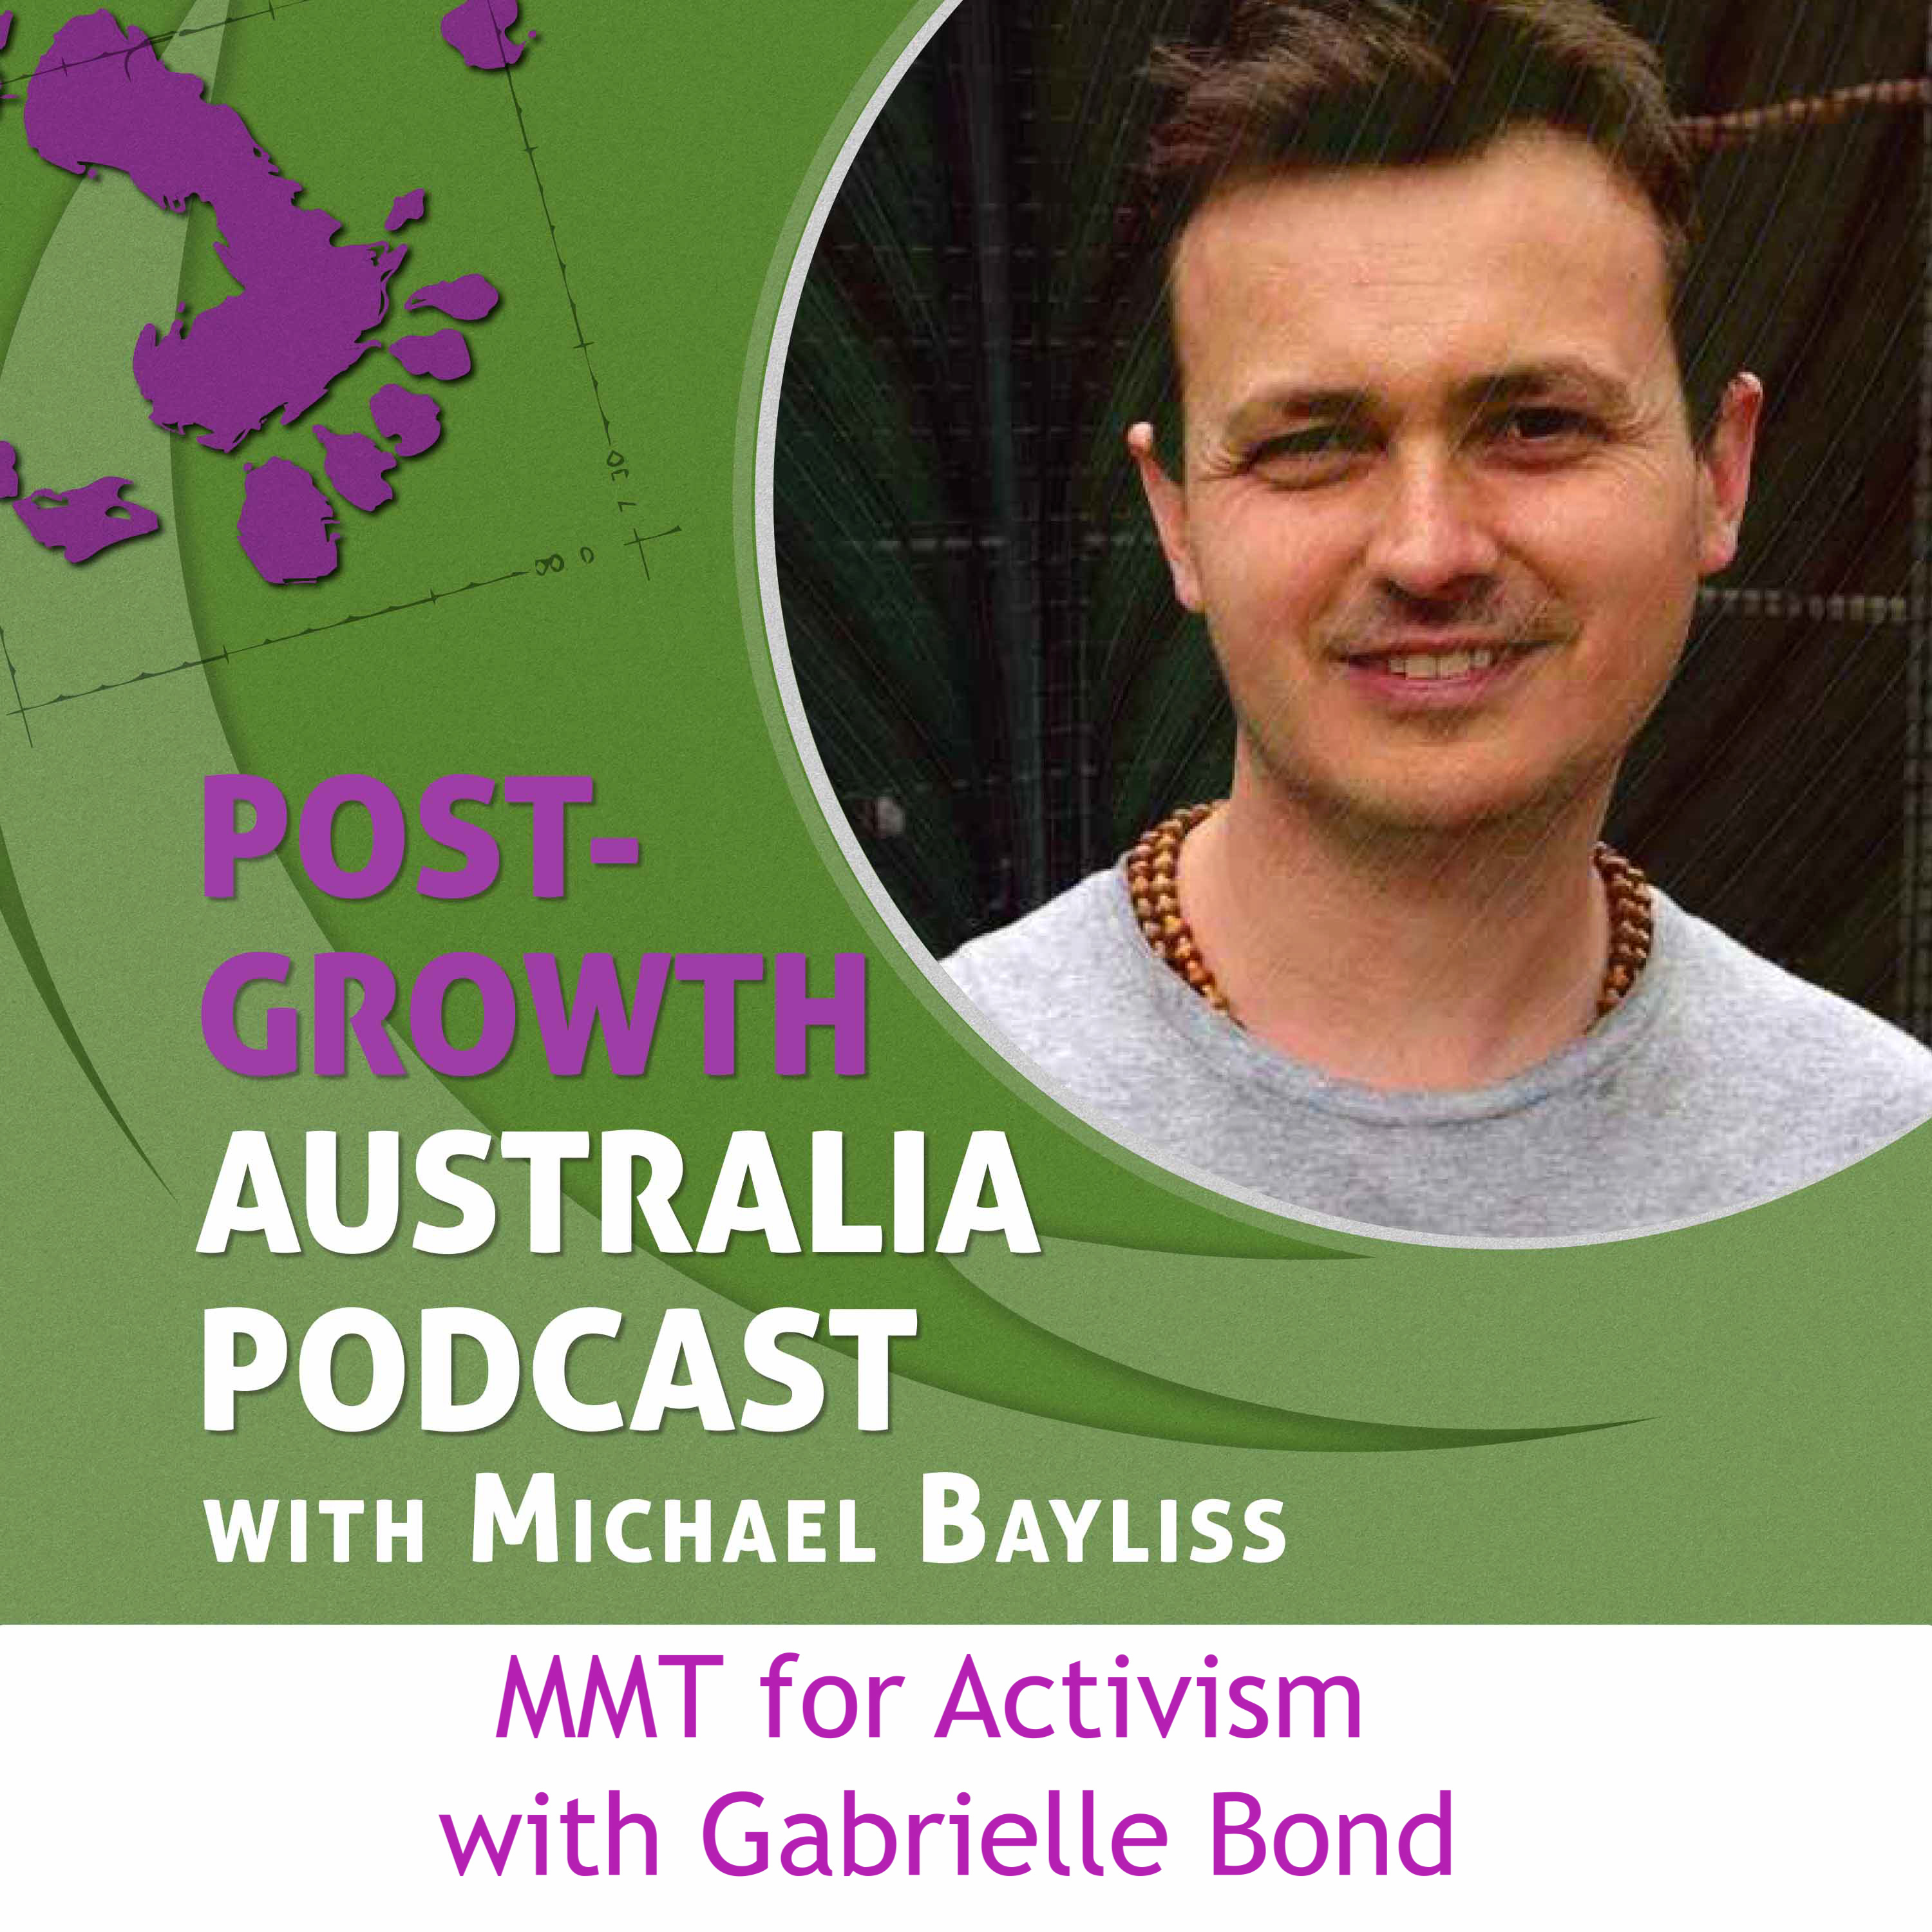 MMT for Activism with Gabrielle Bond